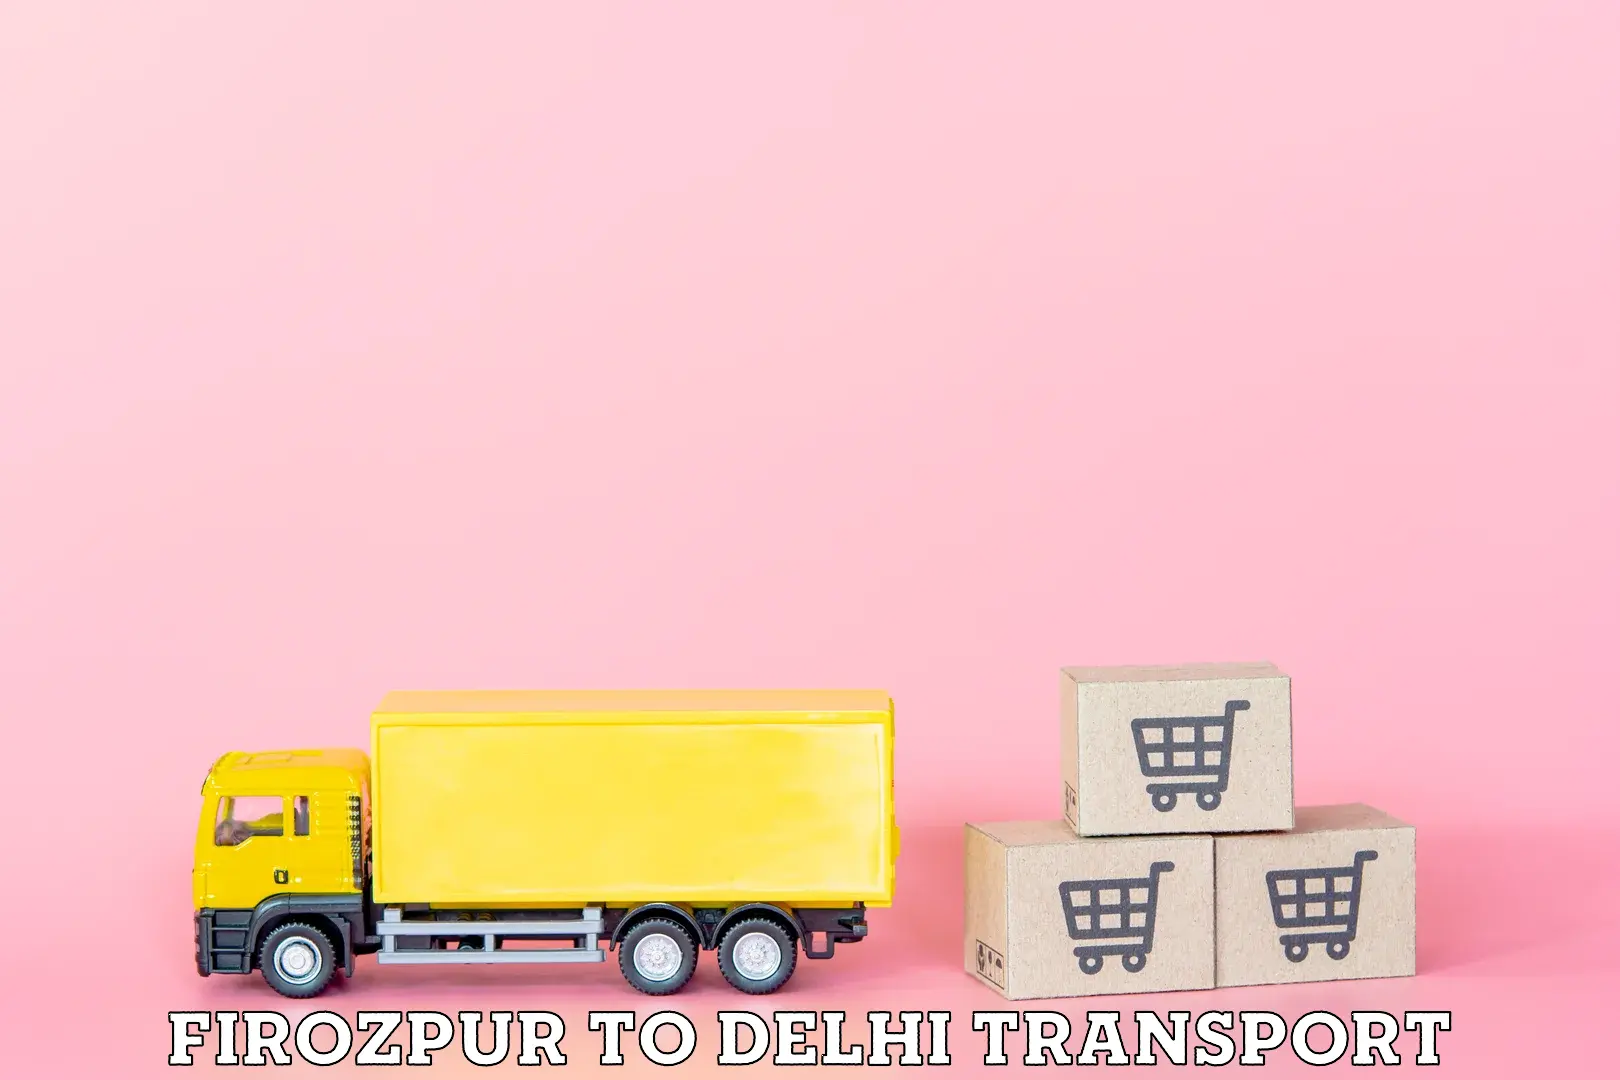 Transport in sharing Firozpur to NCR